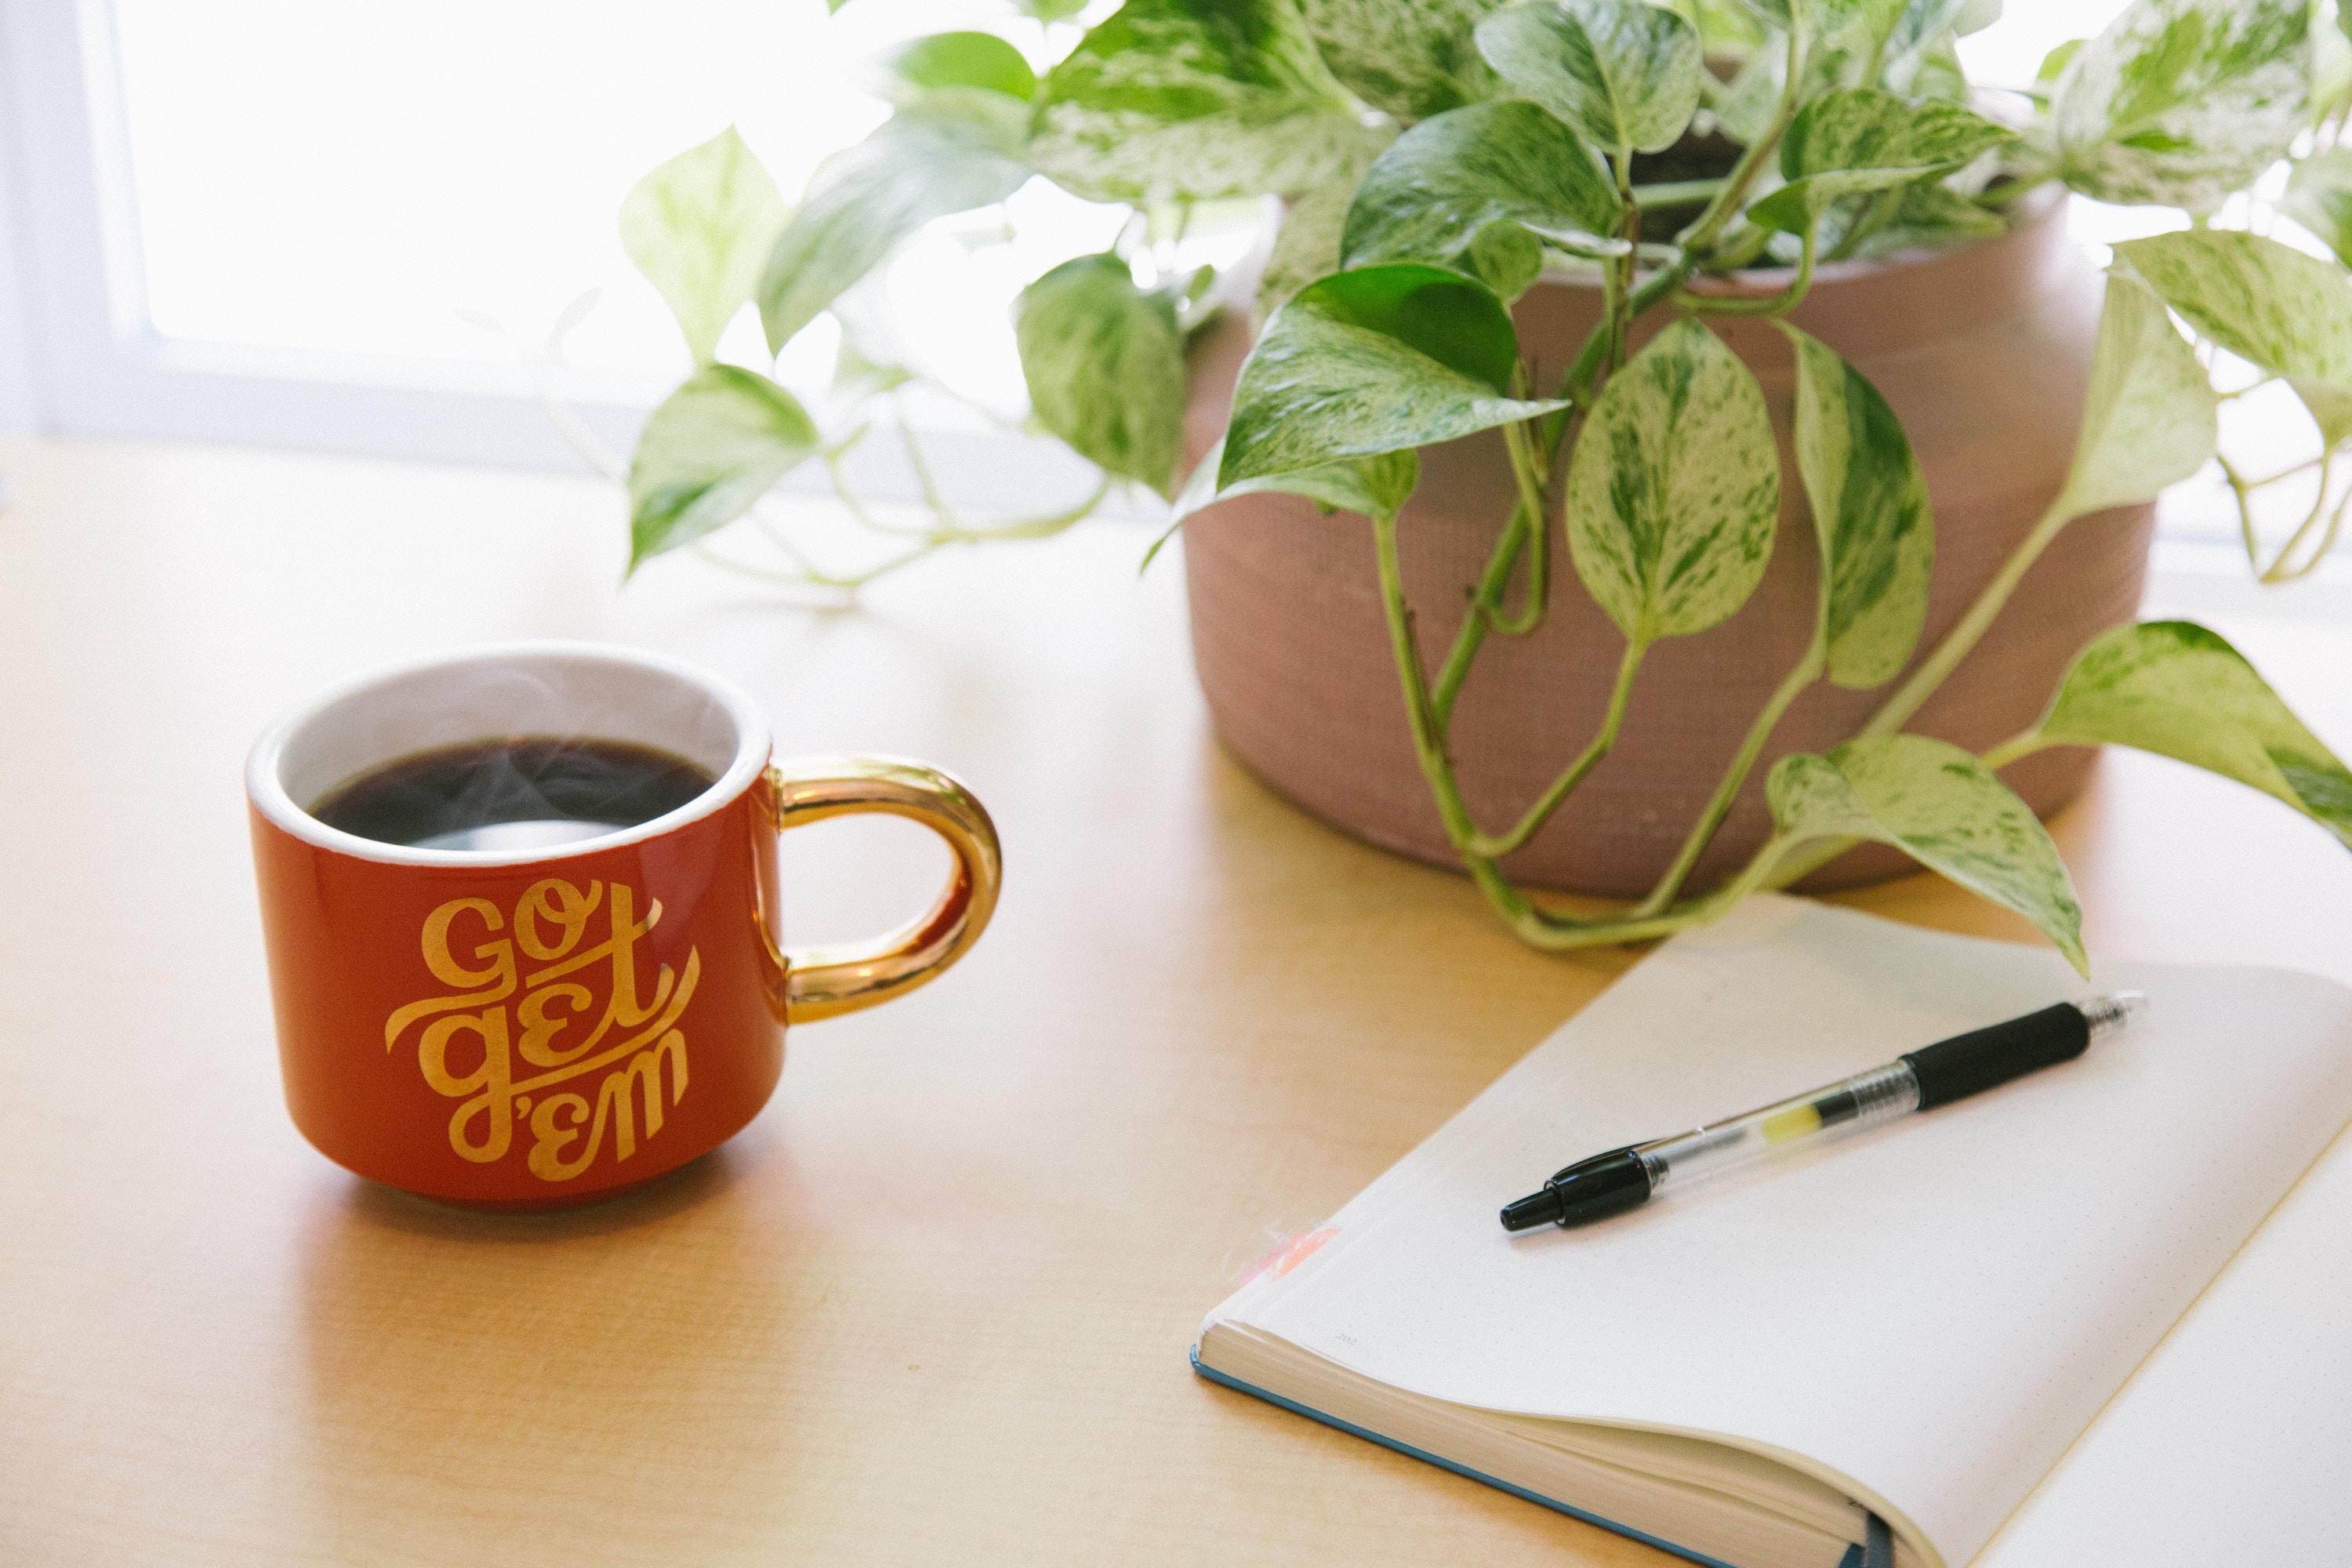 Go Get 'Em mug with house plant and open notebook on table